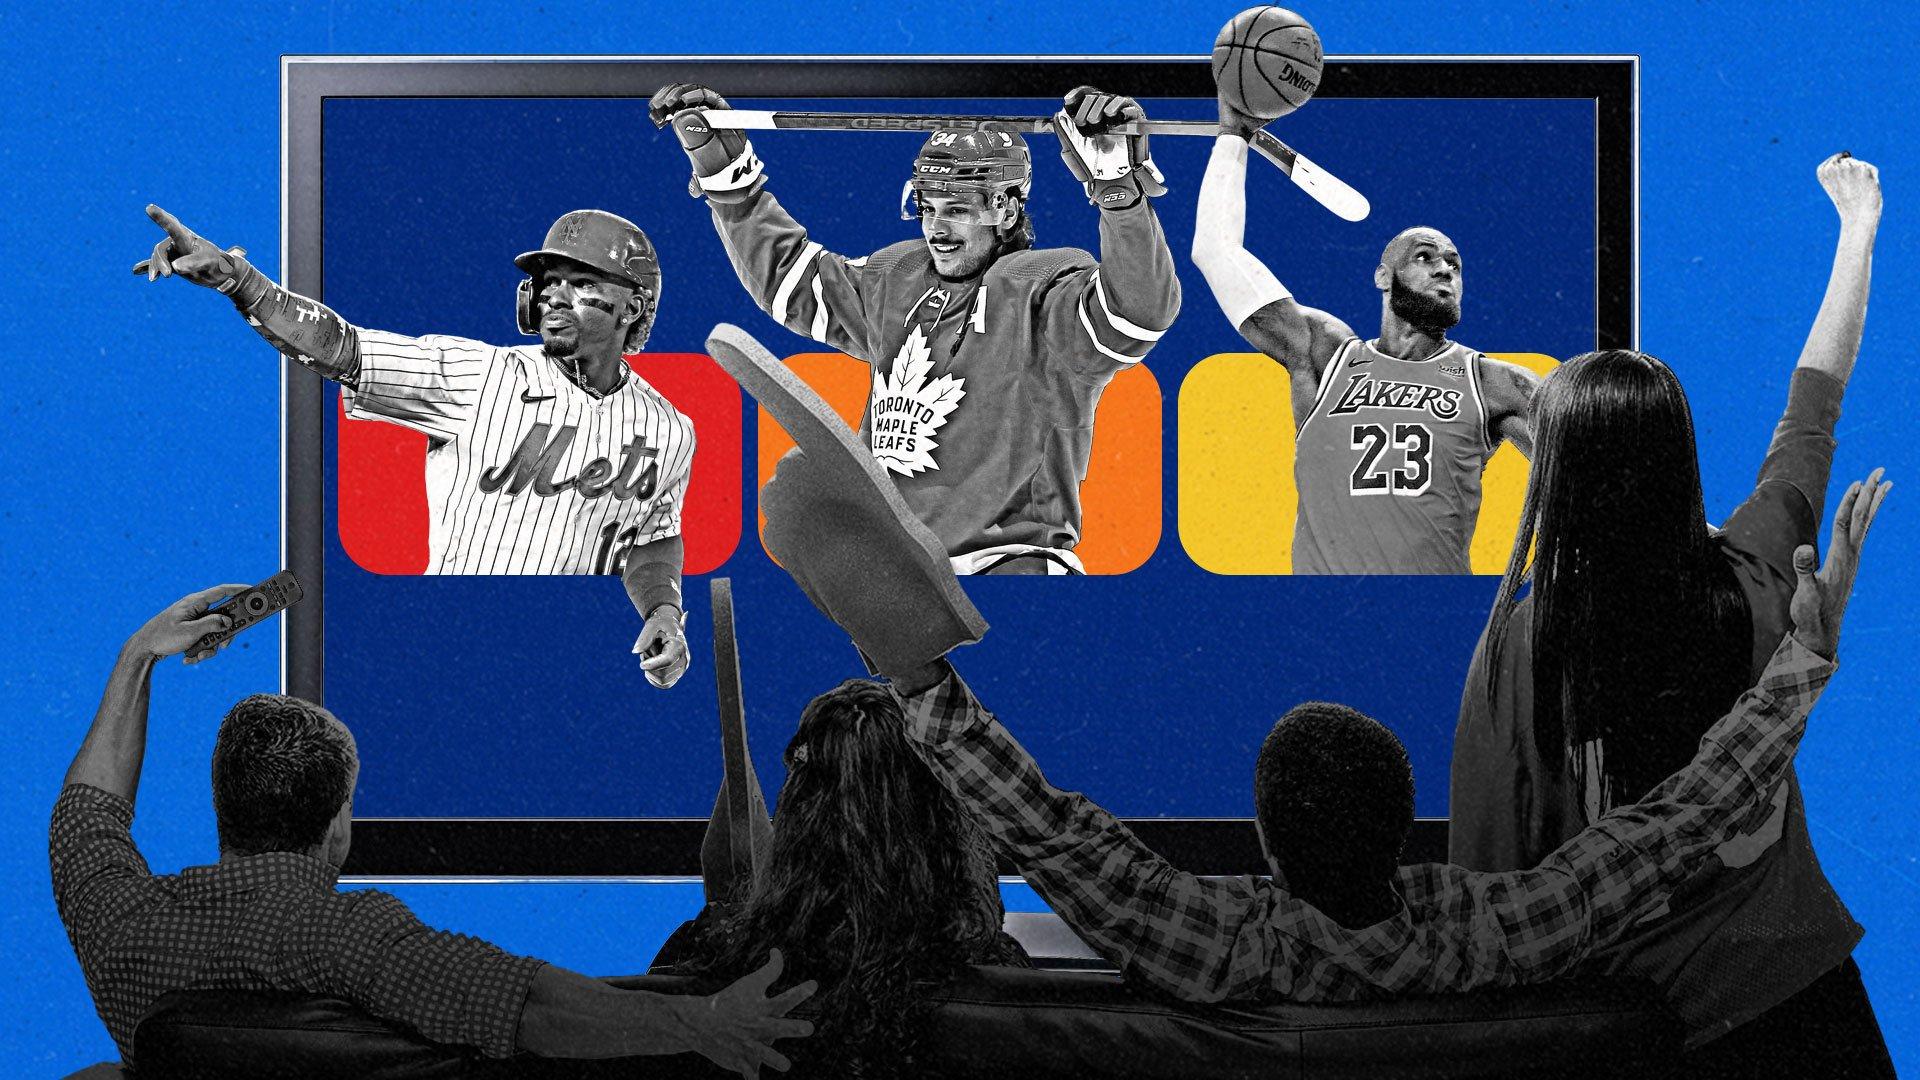 Live sports ‘fandom is flourishing,’ though perhaps it's not where you think